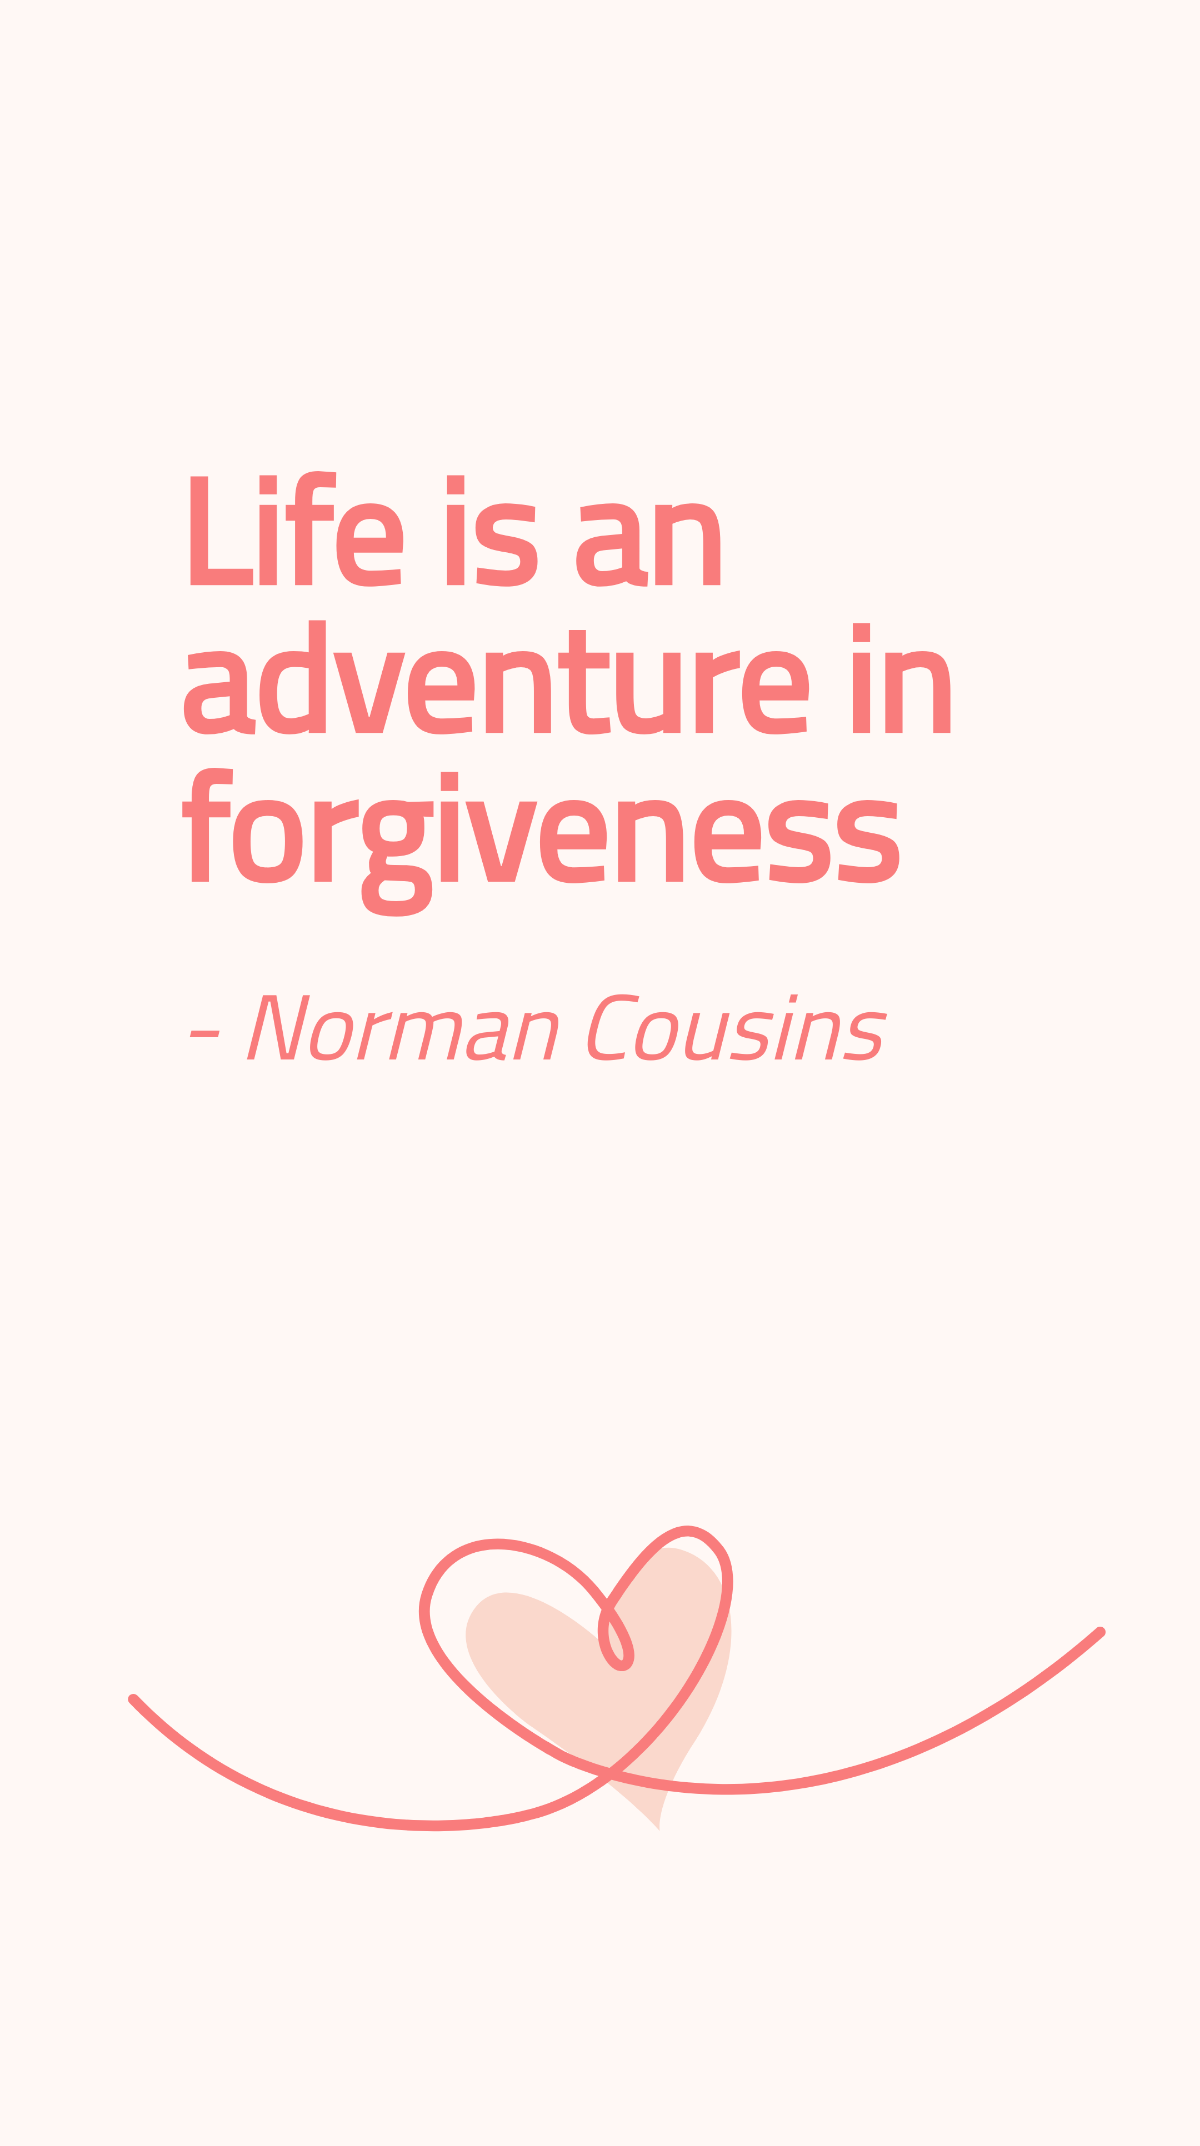 Norman Cousins - Life is an adventure in forgiveness